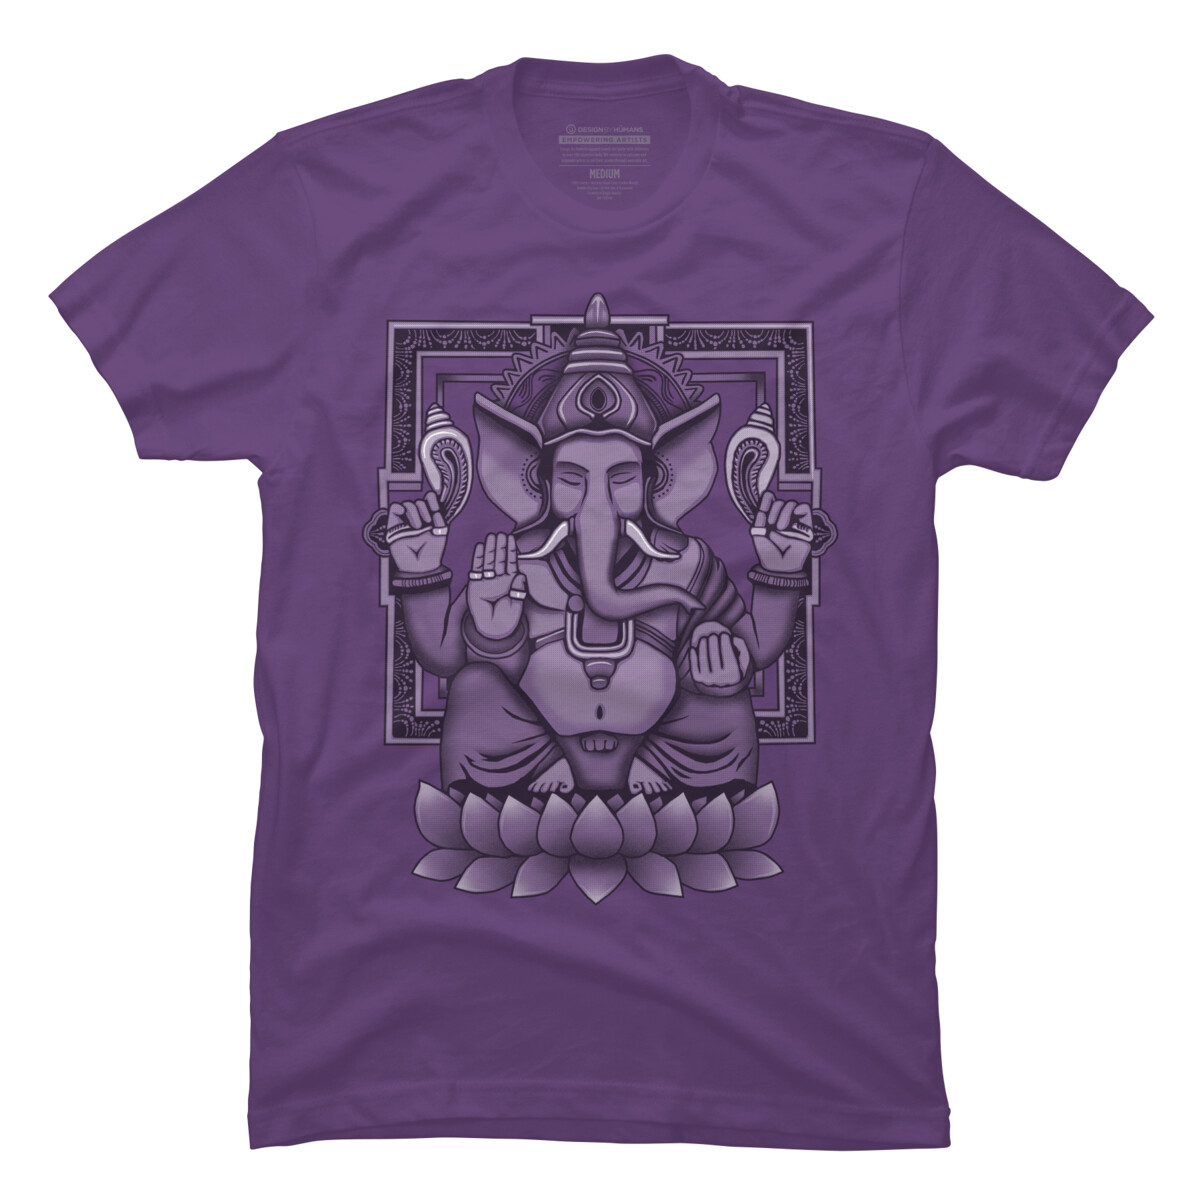 Lord Ganesh Halftone 2 Mens Purple Graphic Tee - Design By Humans  3XL - image 1 of 3